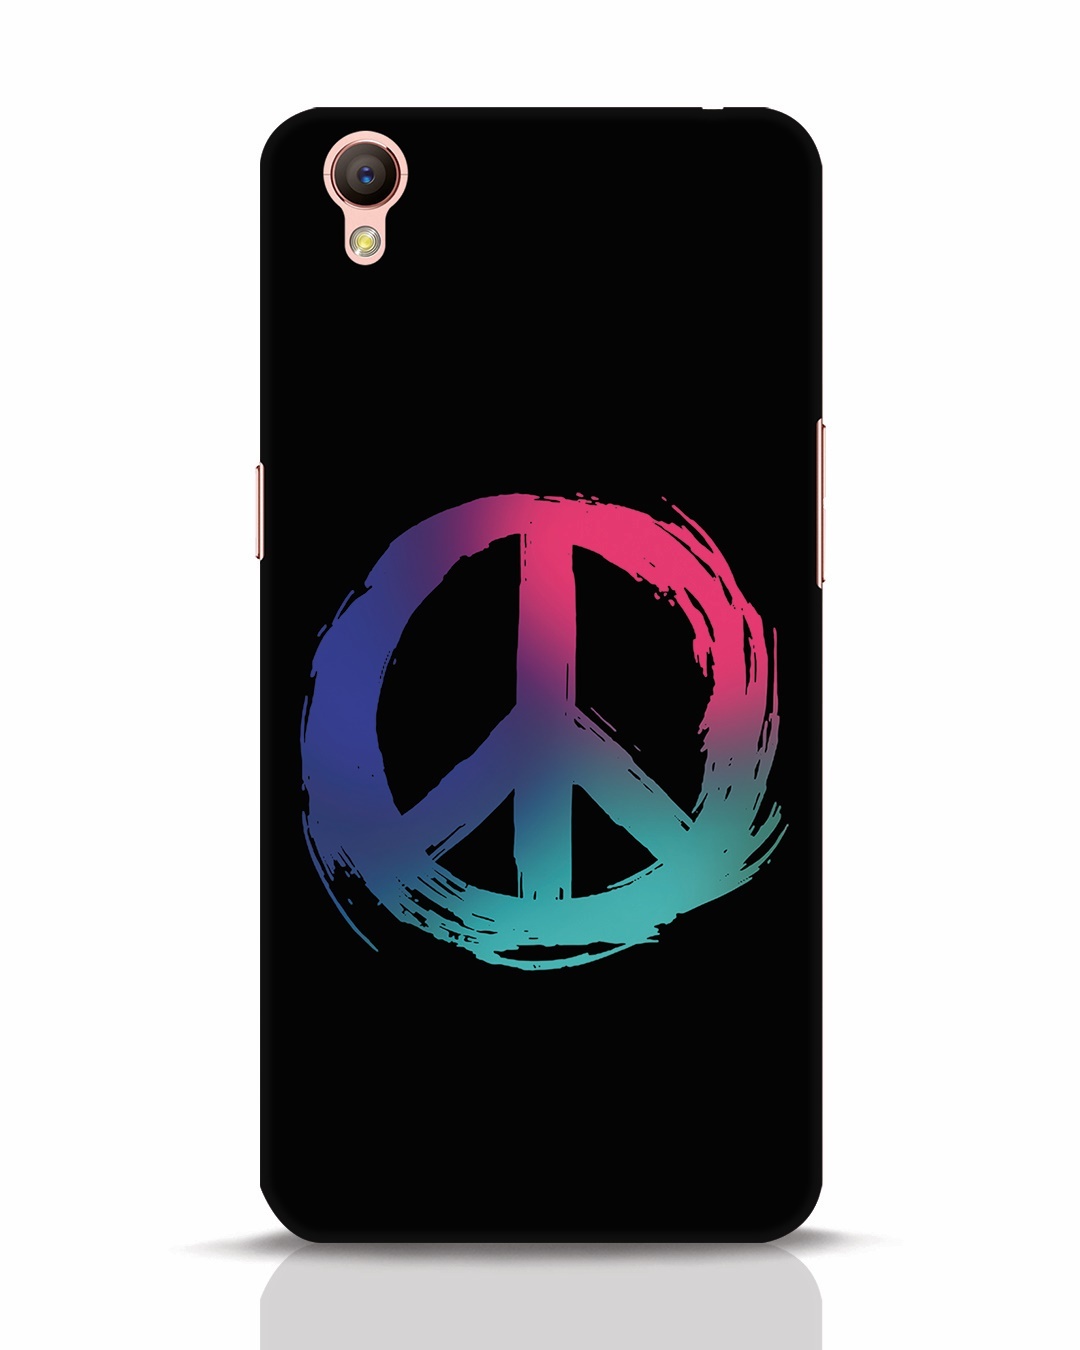 Colors Of Peace Oppo A37 Mobile Cover Oppo A37 Mobile Covers Bewakoof.com